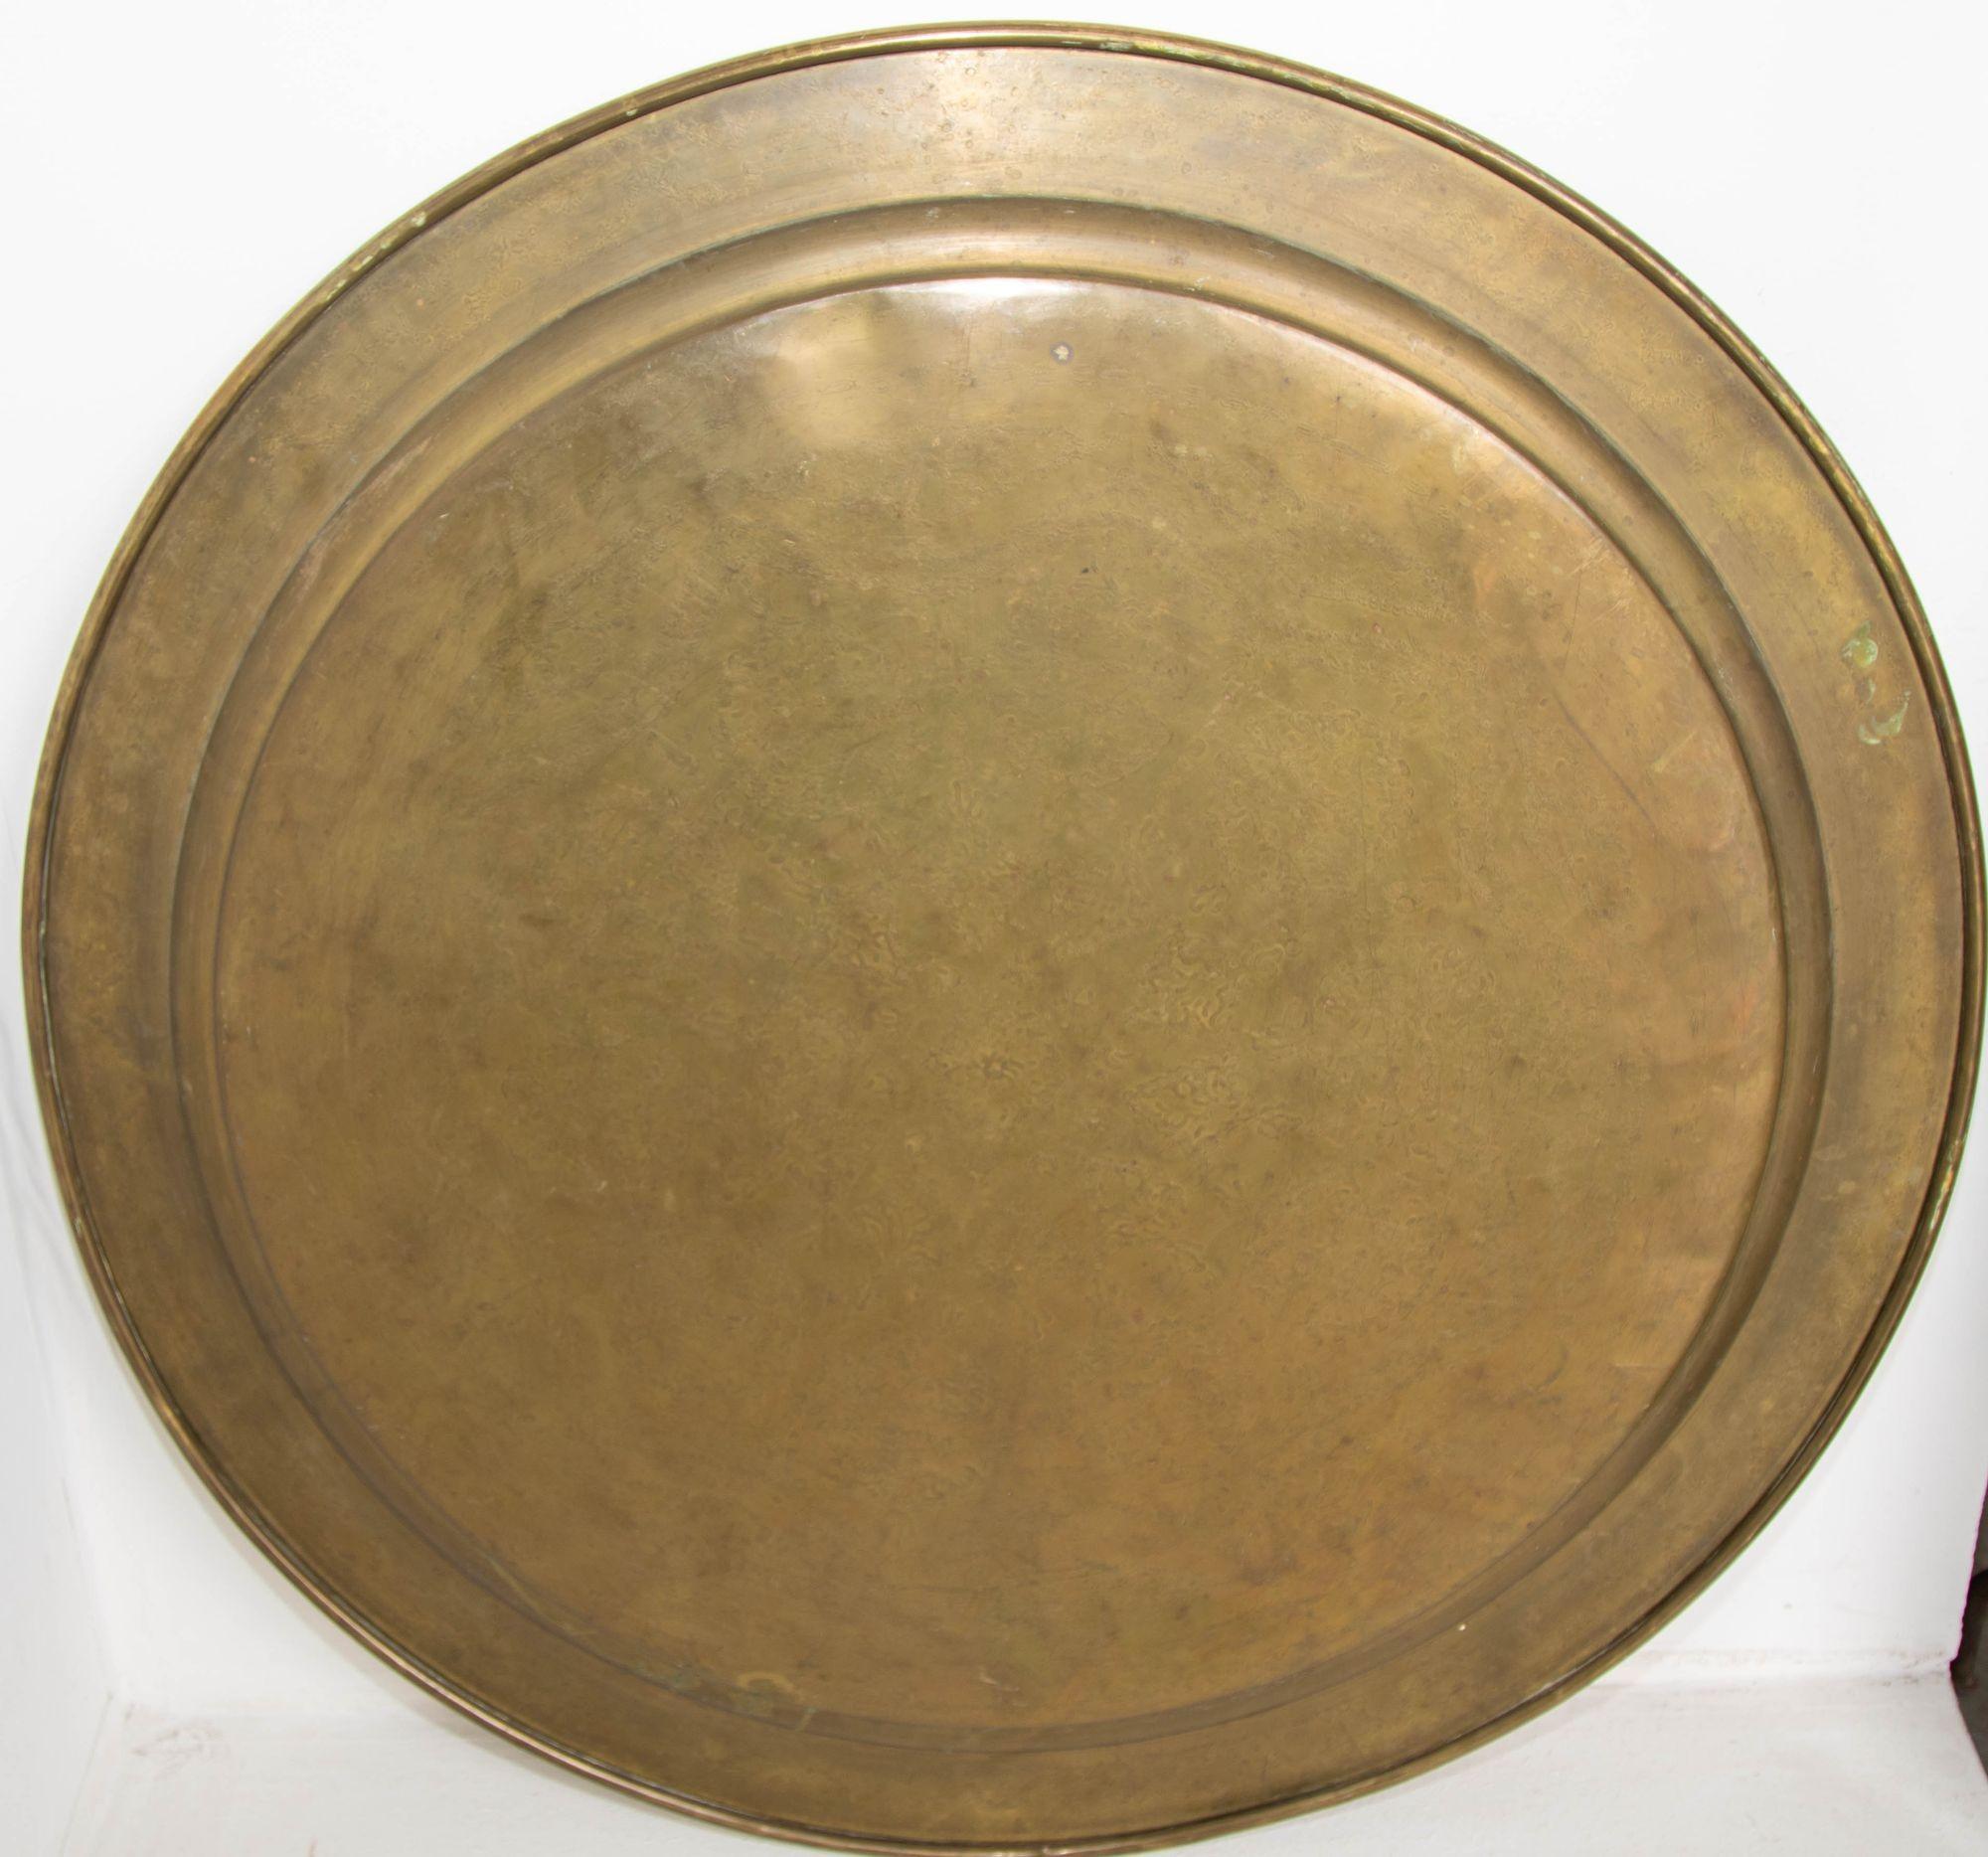 Antique Oversized Round Moroccan Polished Brass Tray Platter 19th C. For Sale 3